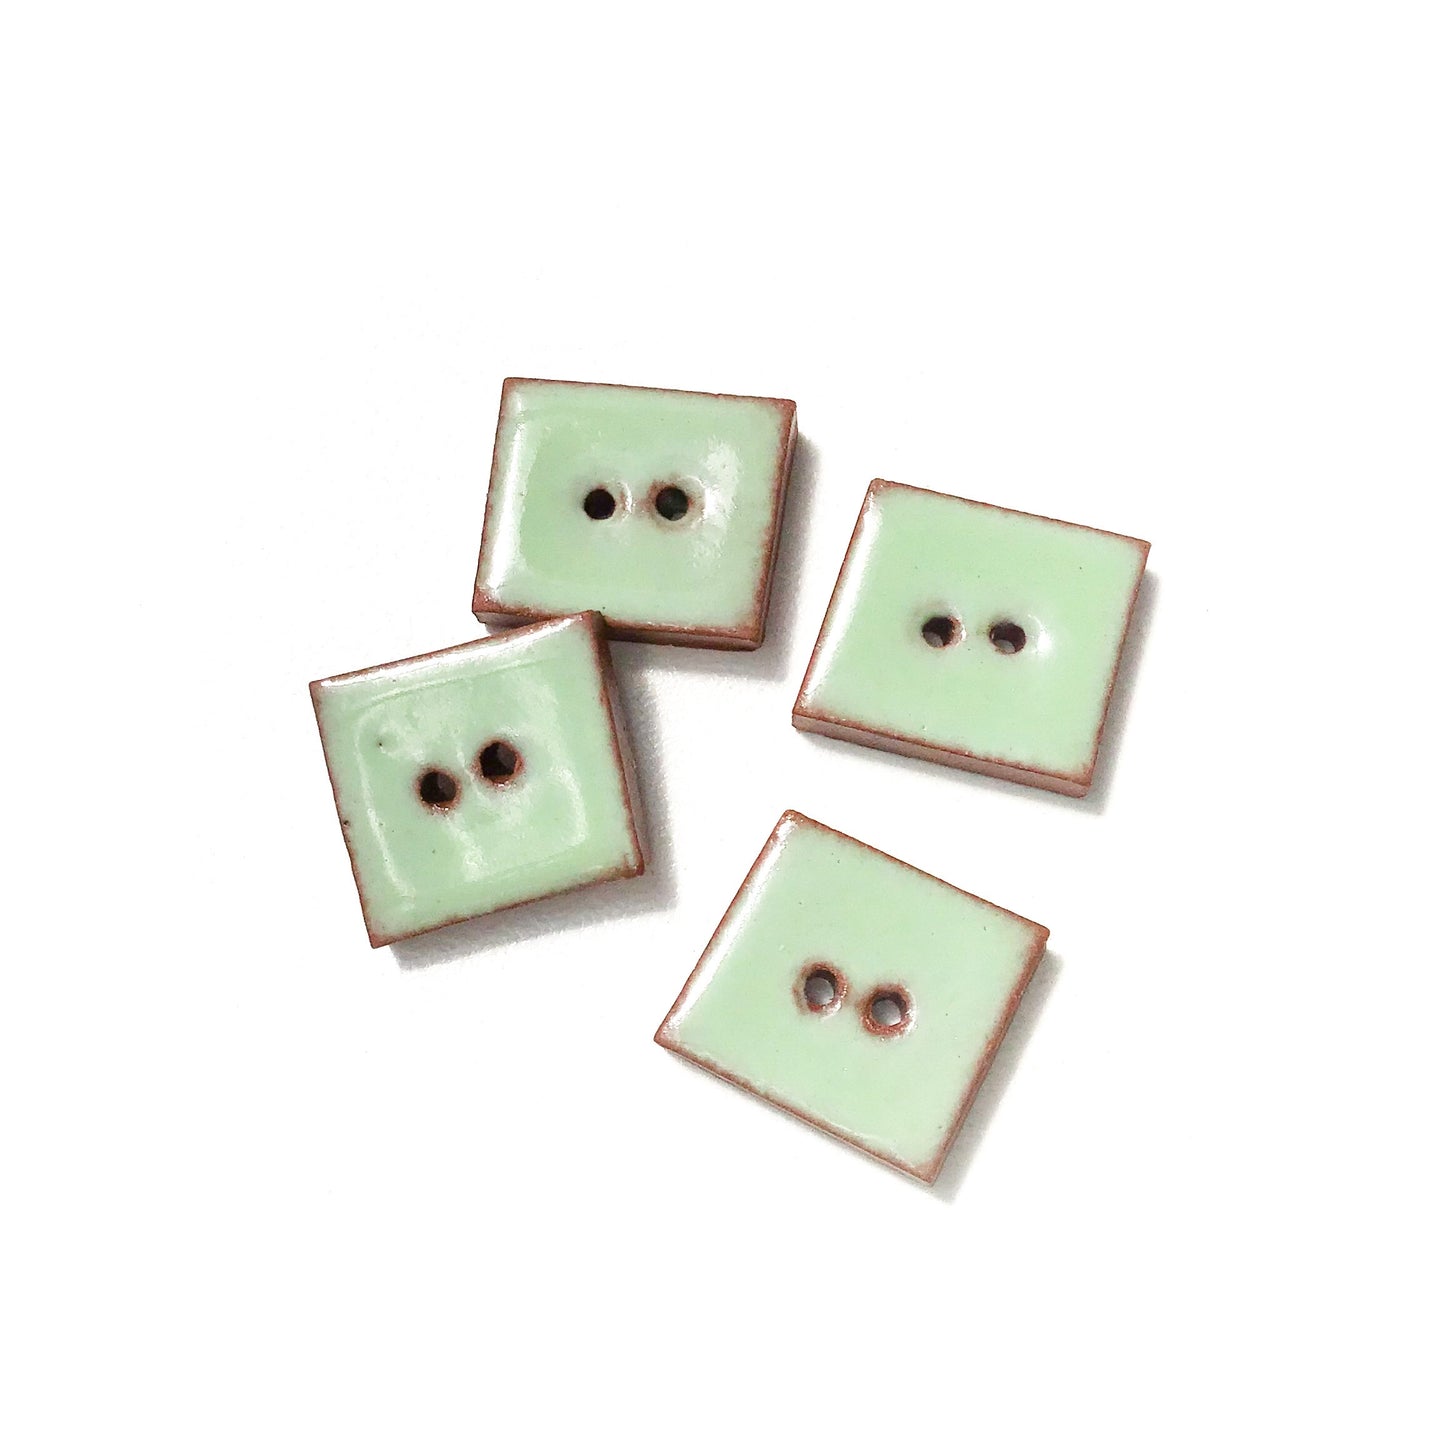 Minty Green Buttons on Red Clay - Geometric Ceramic Buttons - 1/2" x 9/16"- 4 Pack